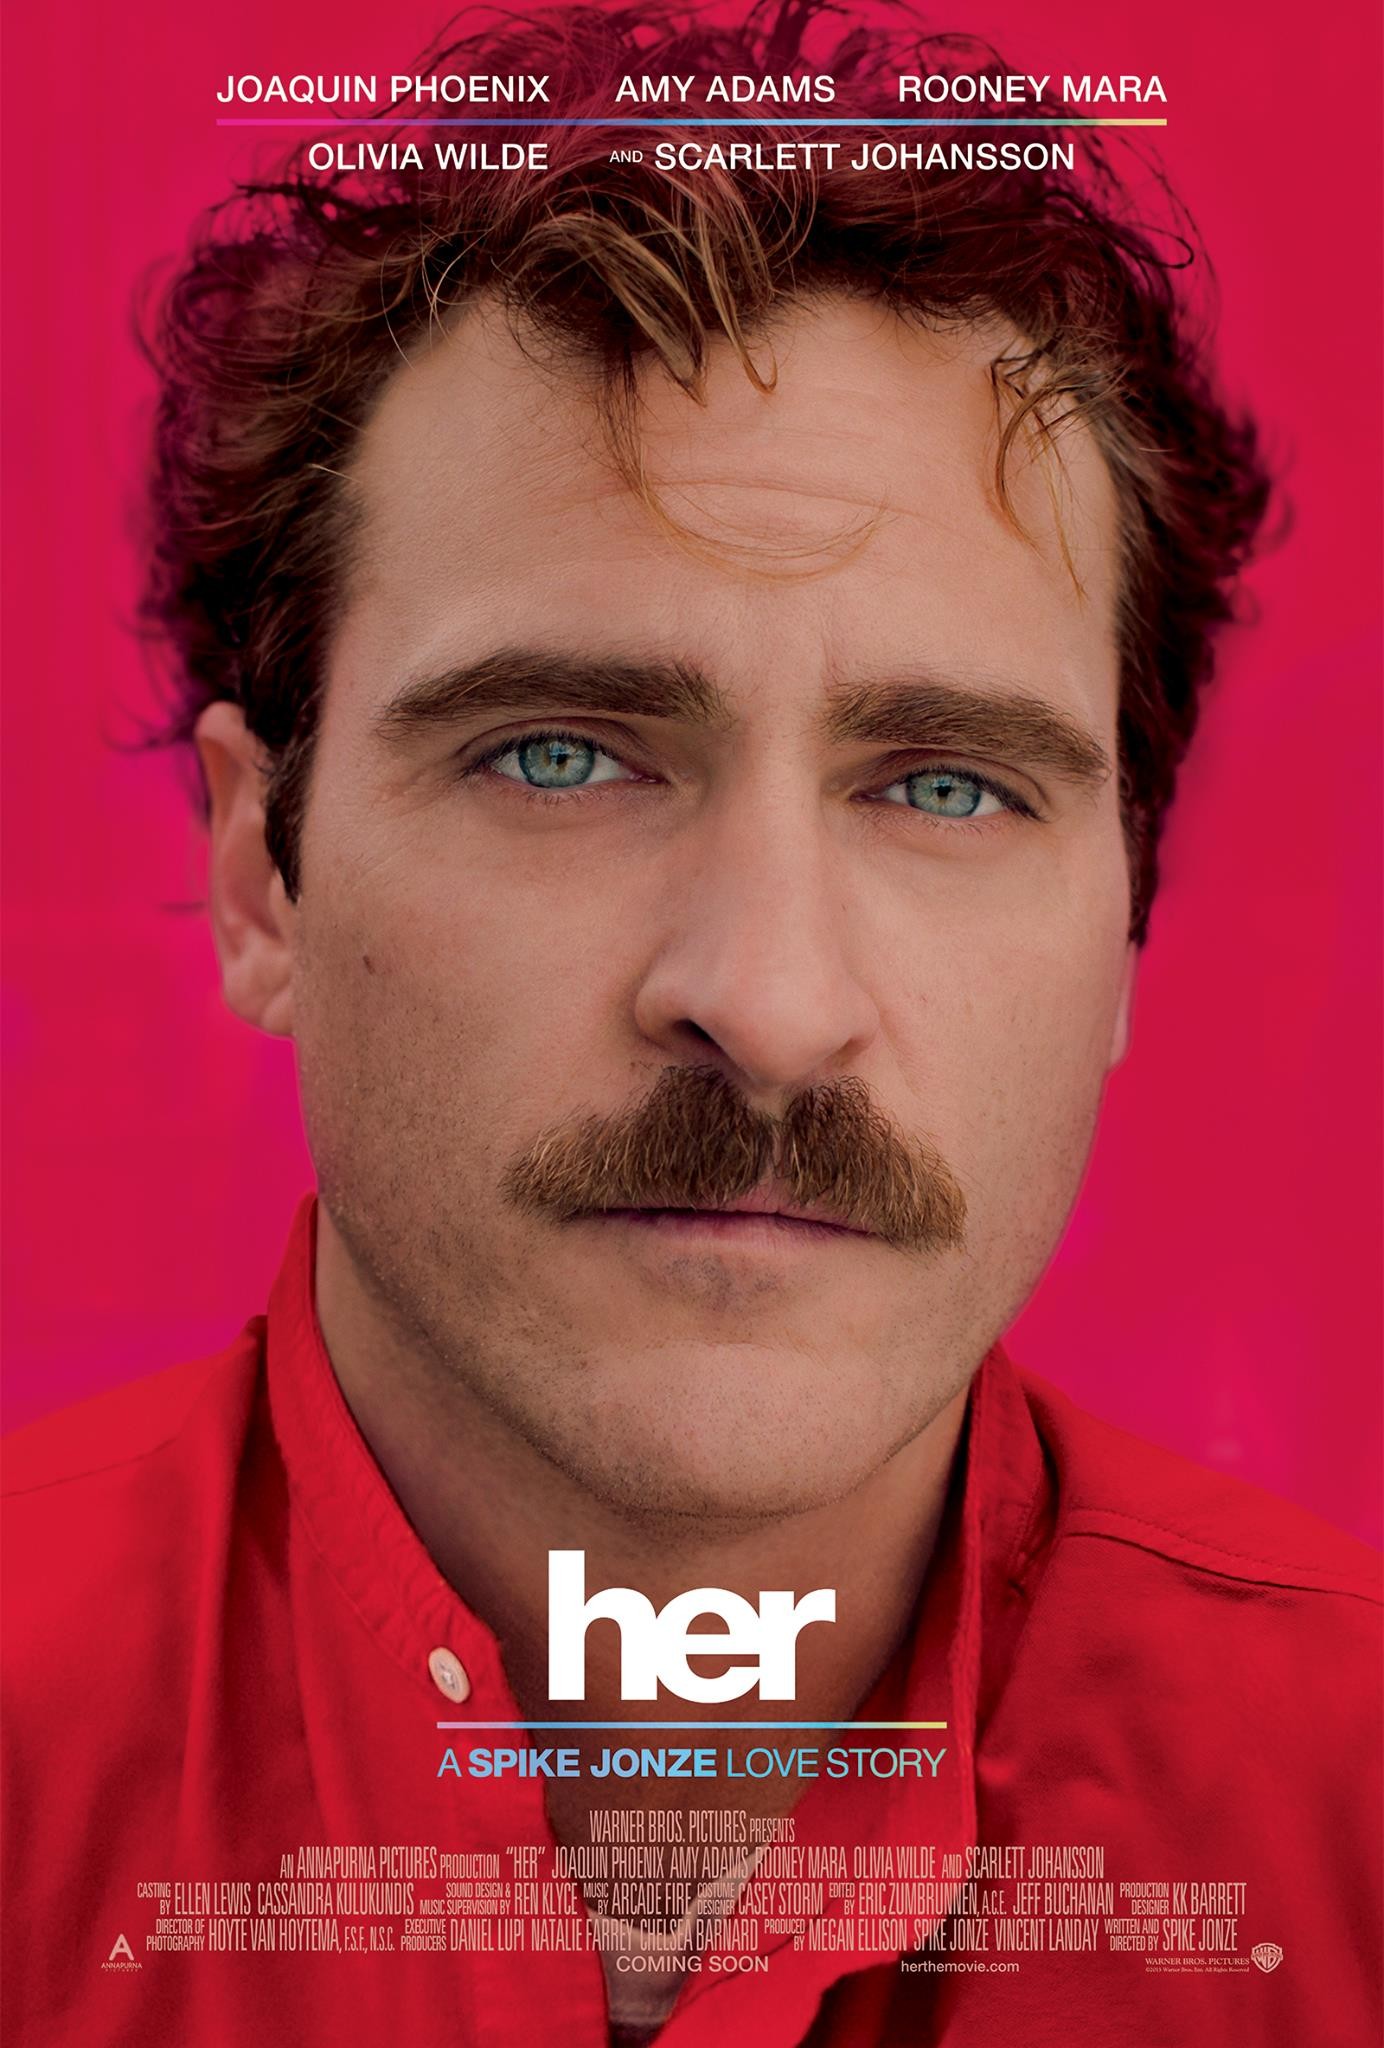 Spike Jonze’s New Movie “her” Examines Falling in Love with Artificial Intelligence